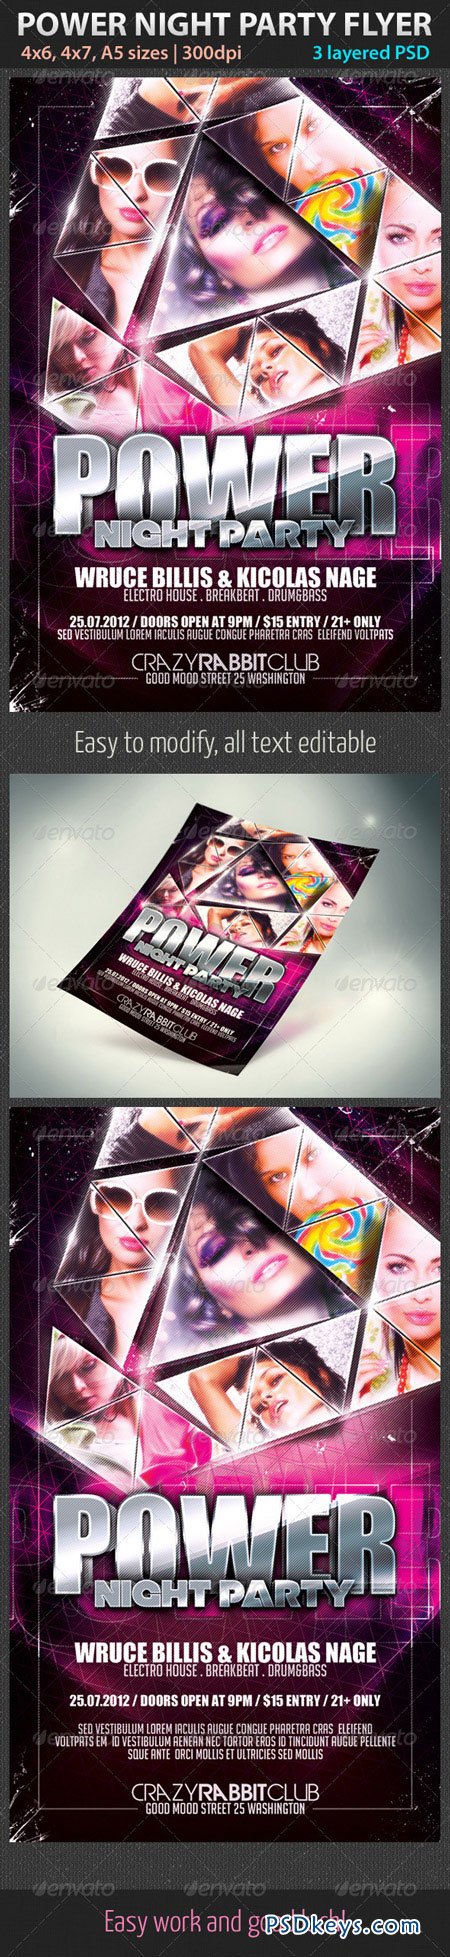 Power Night Party Flyer 2650858